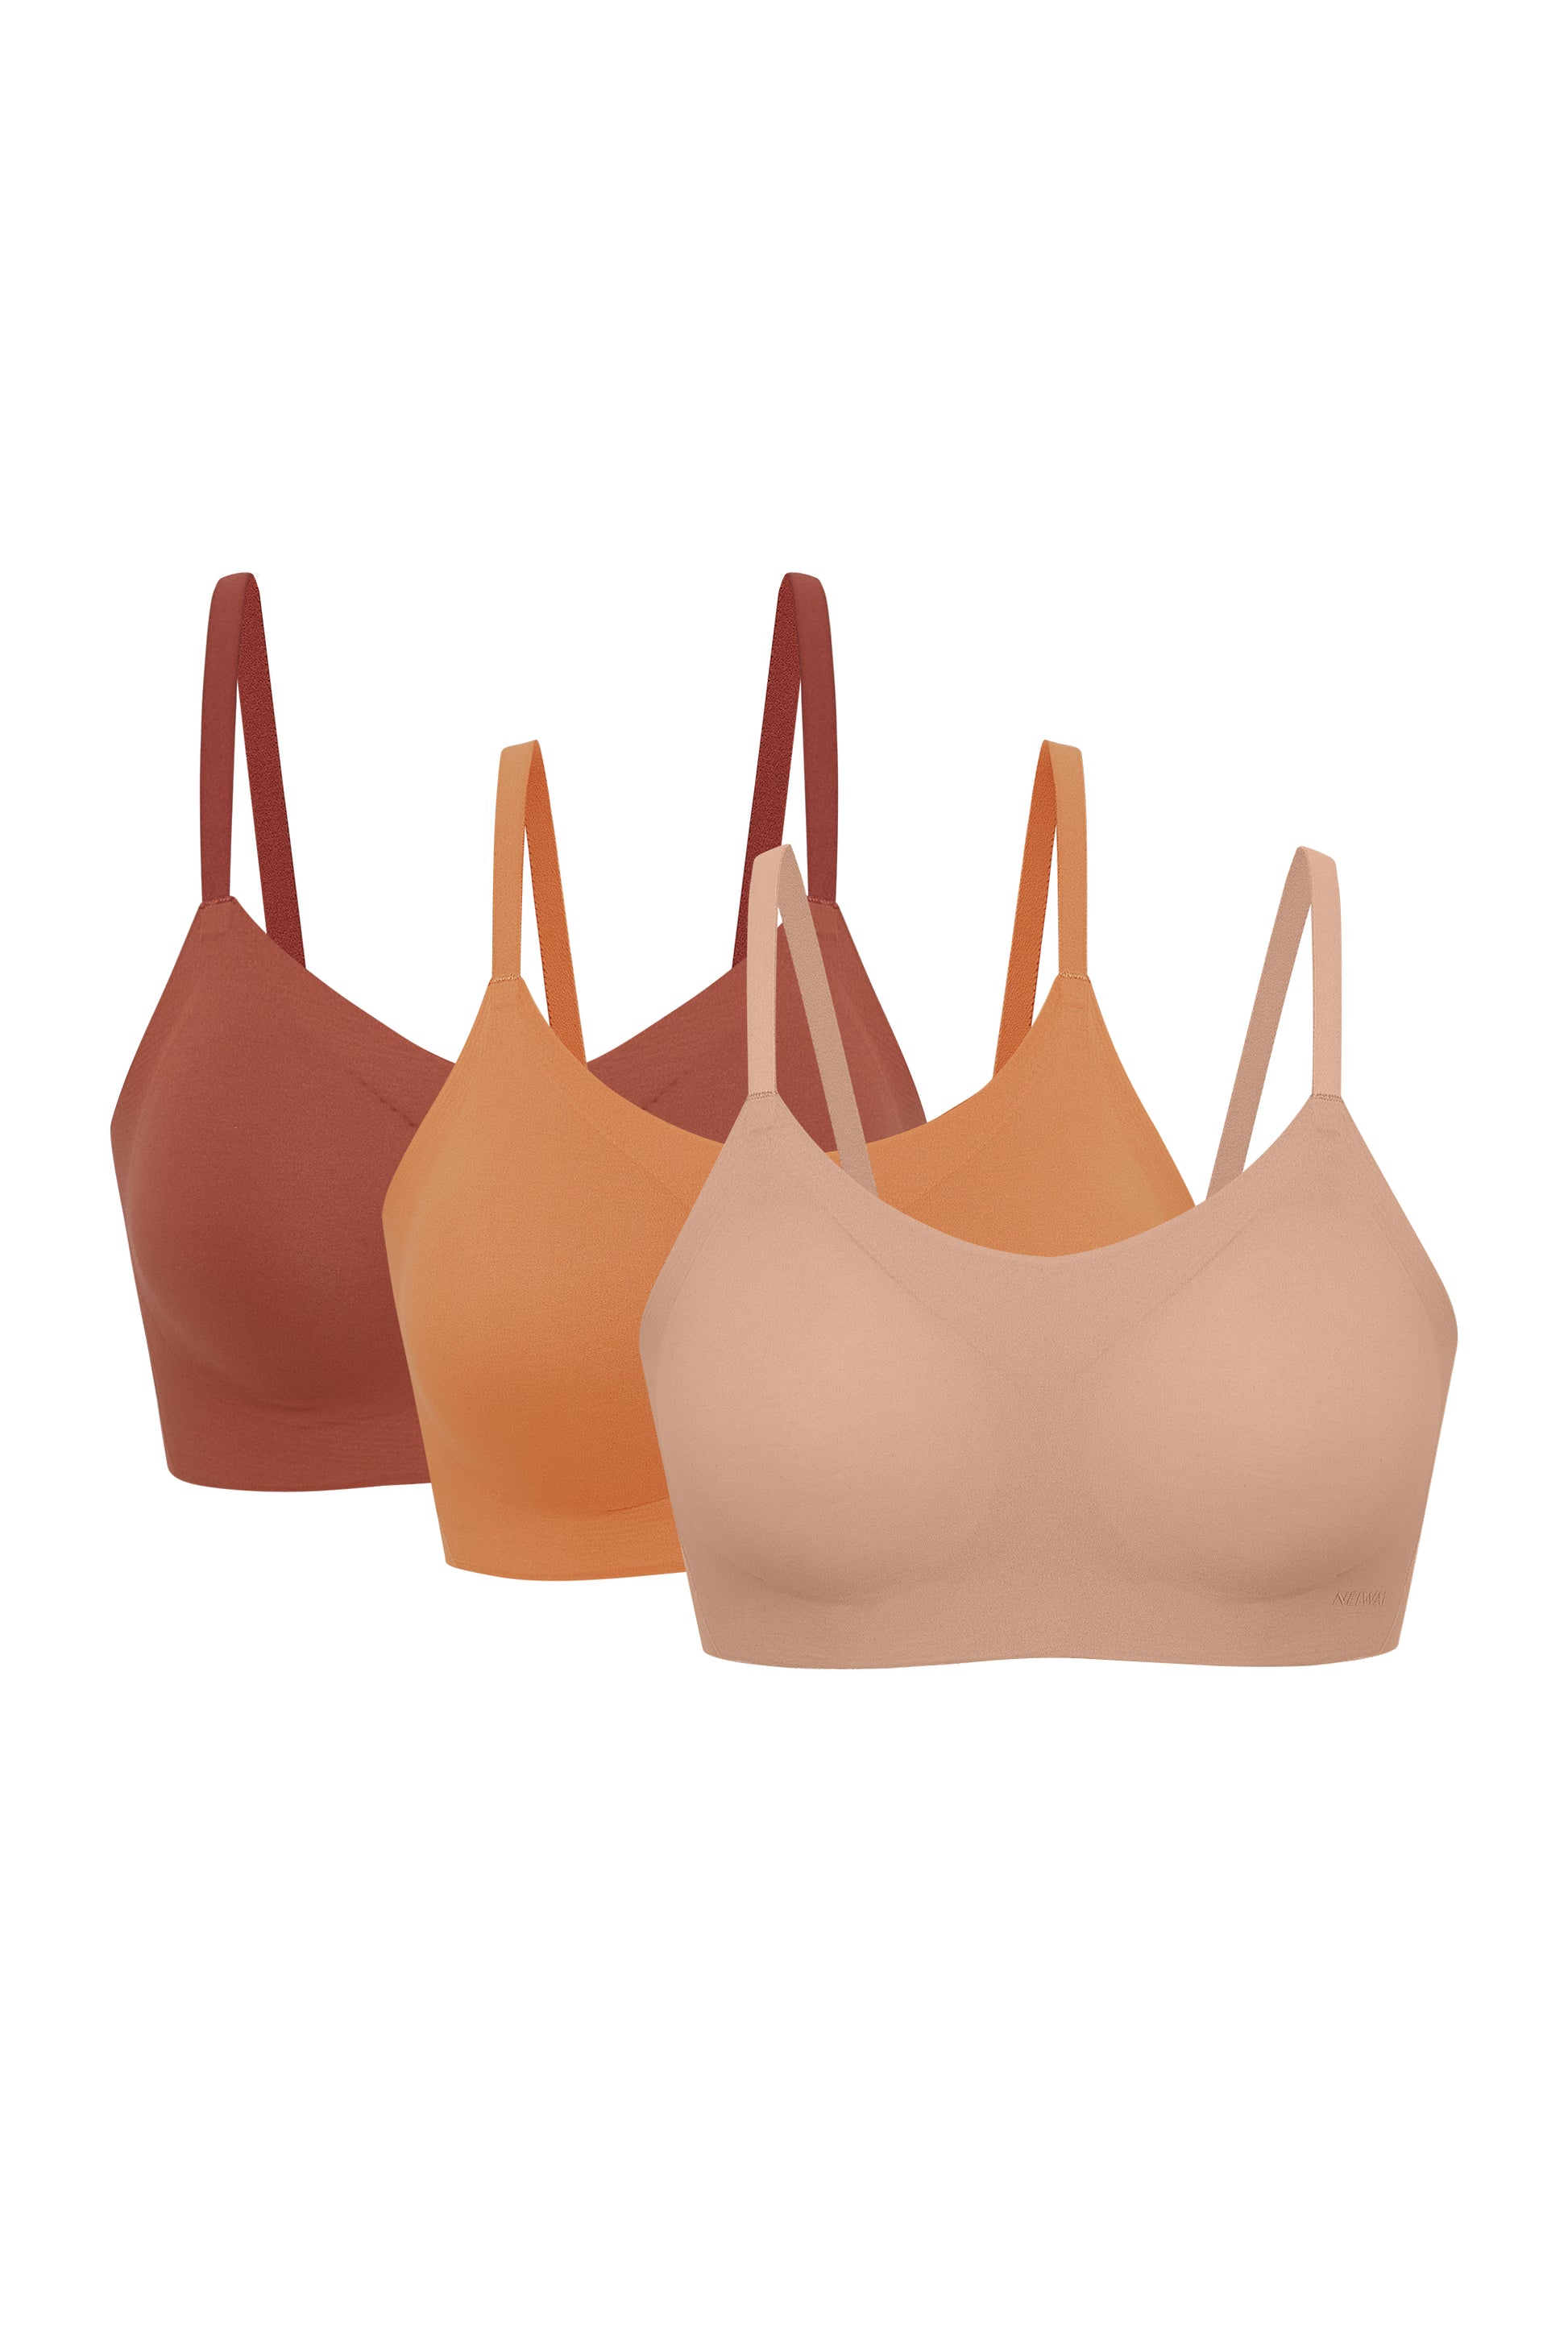 Cotton Bras, New collection